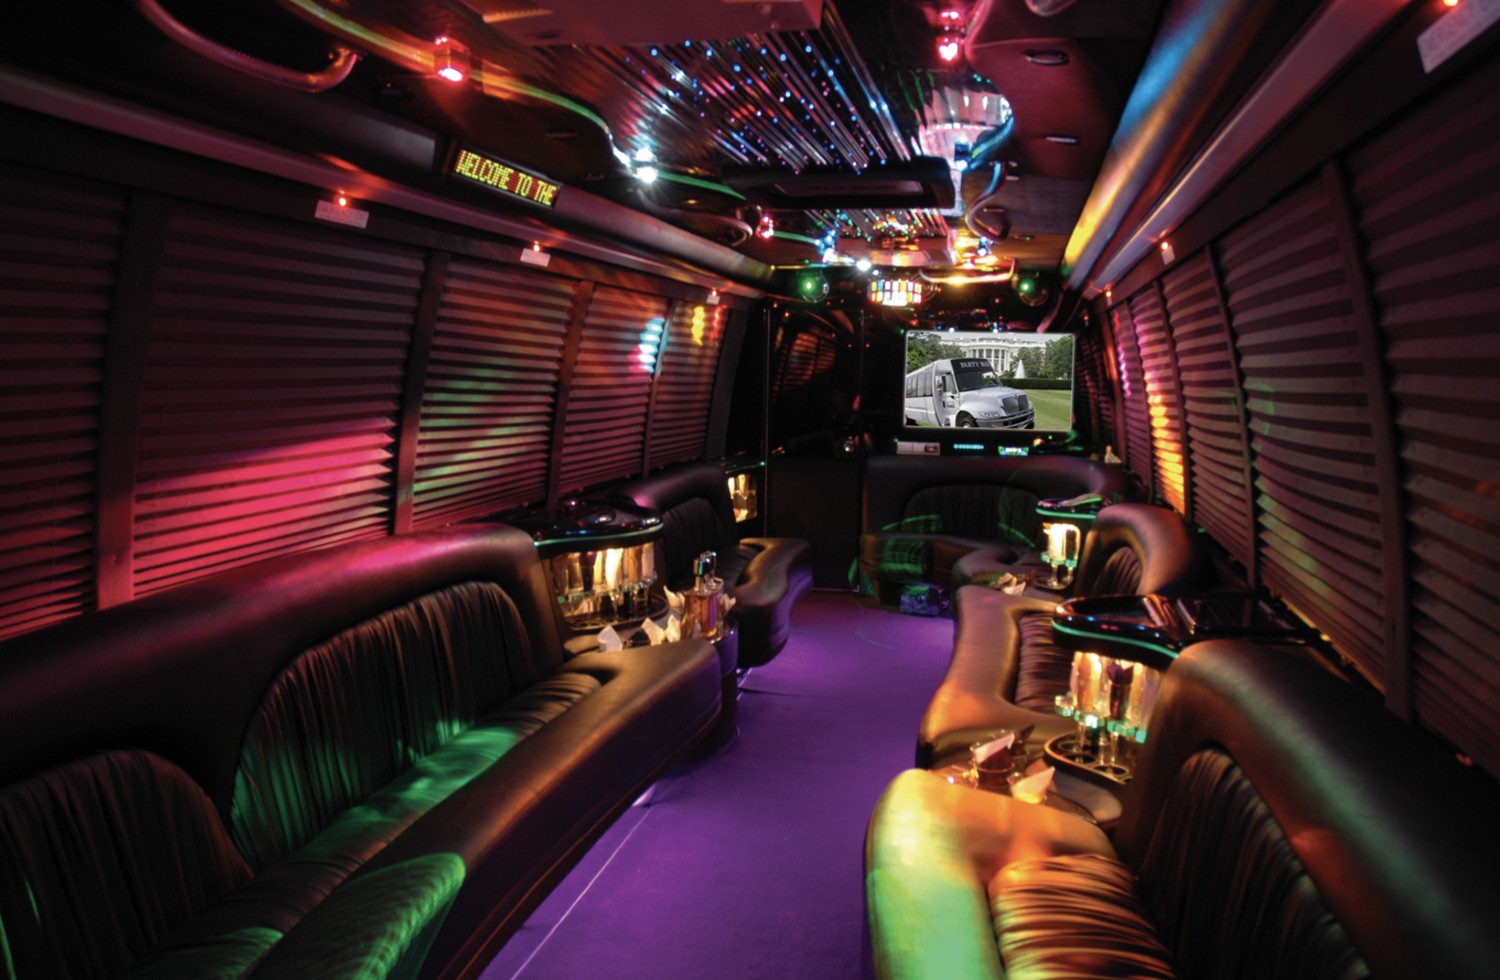 Smart Party Buses: You’ll Get the Lowest Price and the Best Service Possible